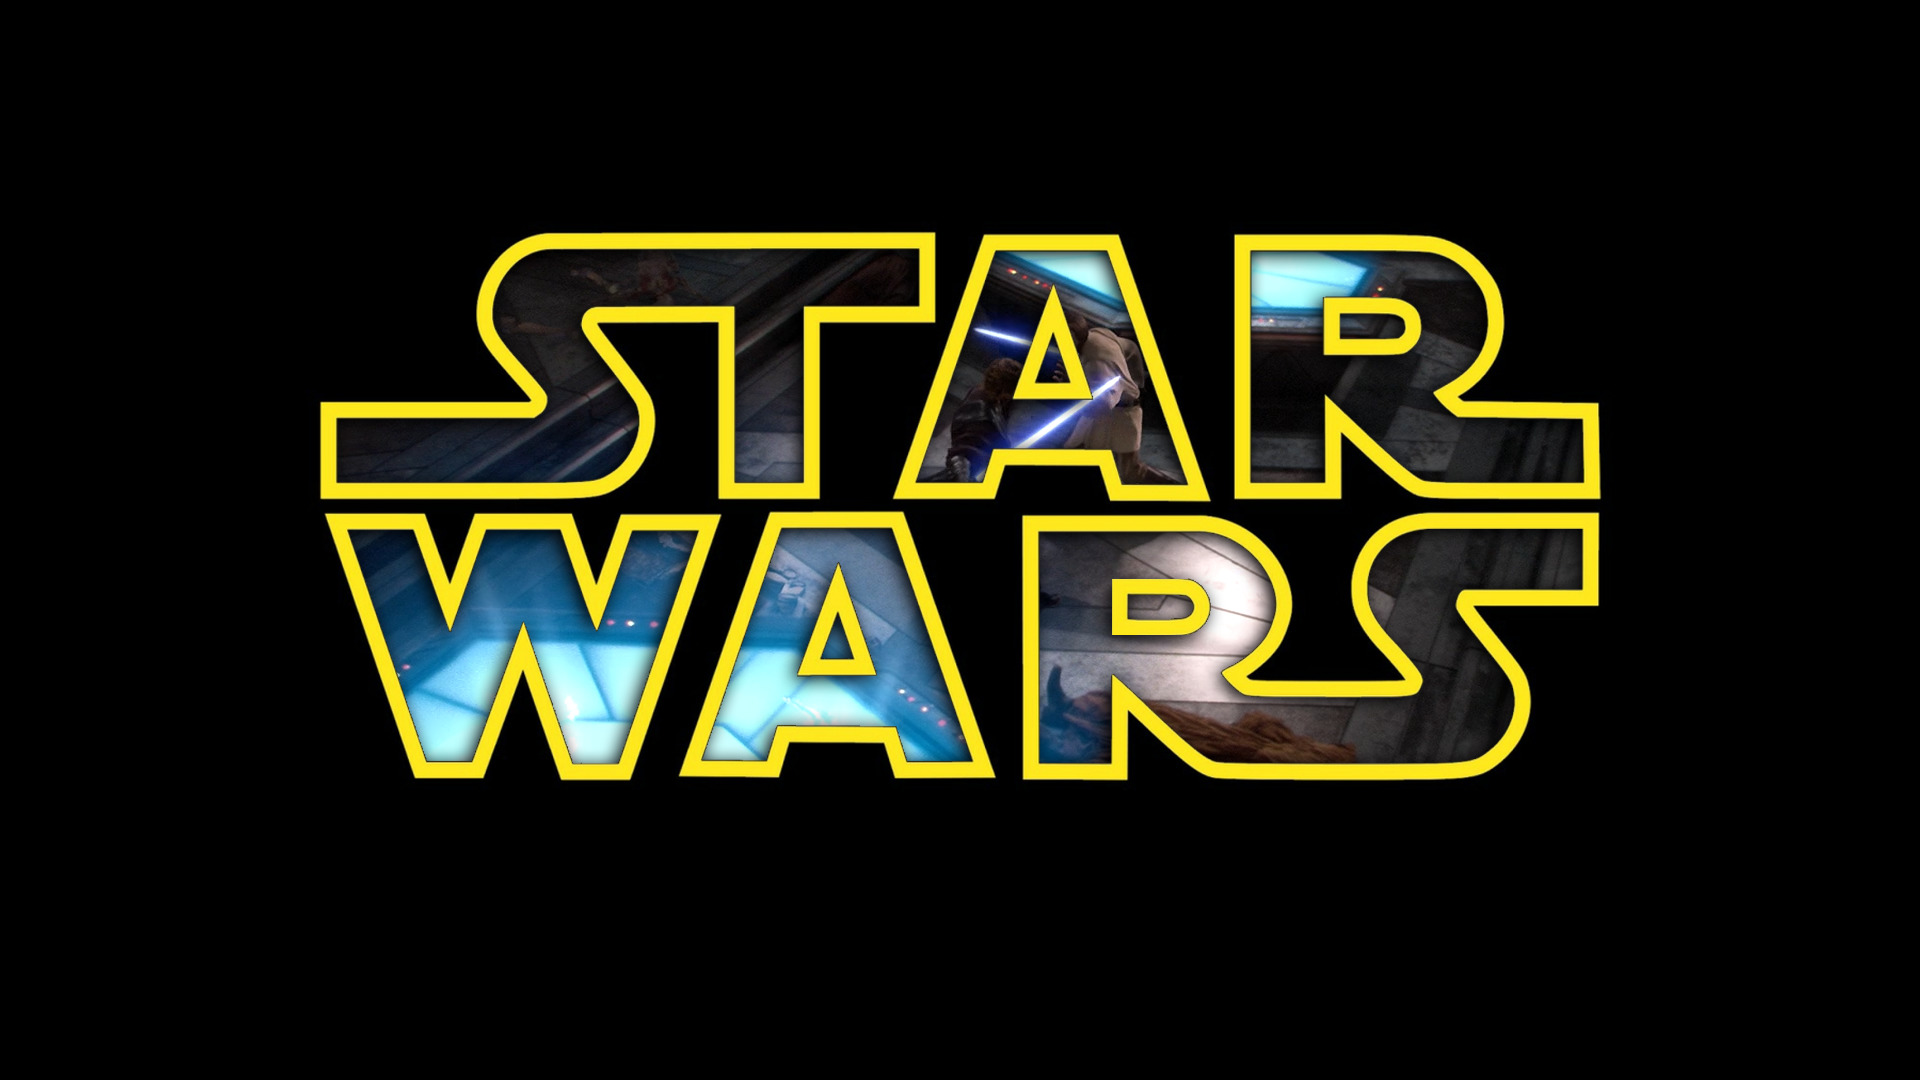 Star Wars, Typography, Black Background Wallpapers HD / Desktop and